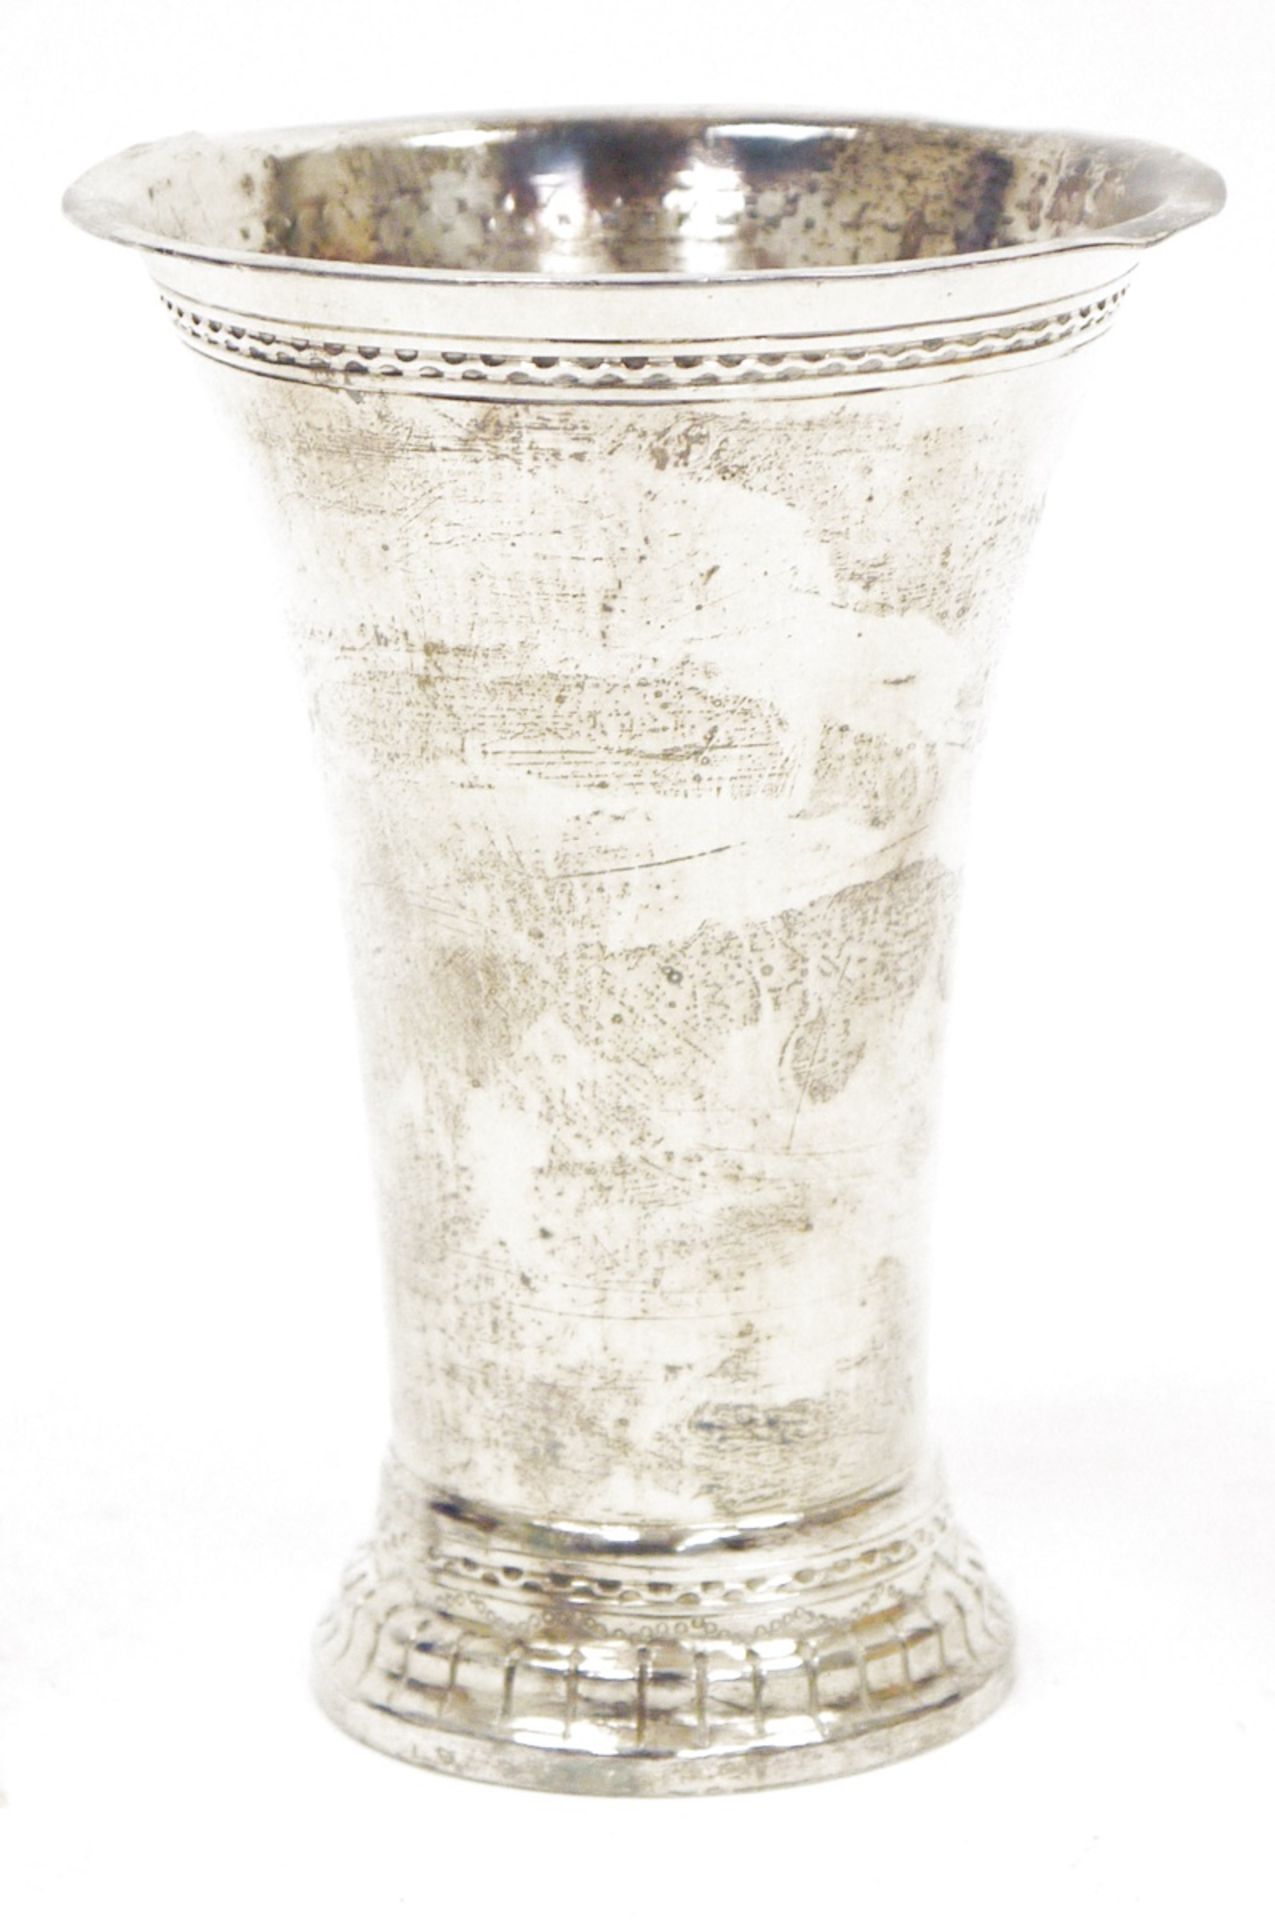 Early 20th century Arts & Crafts silver plated beaker by The Keswick School of Industrial Art,